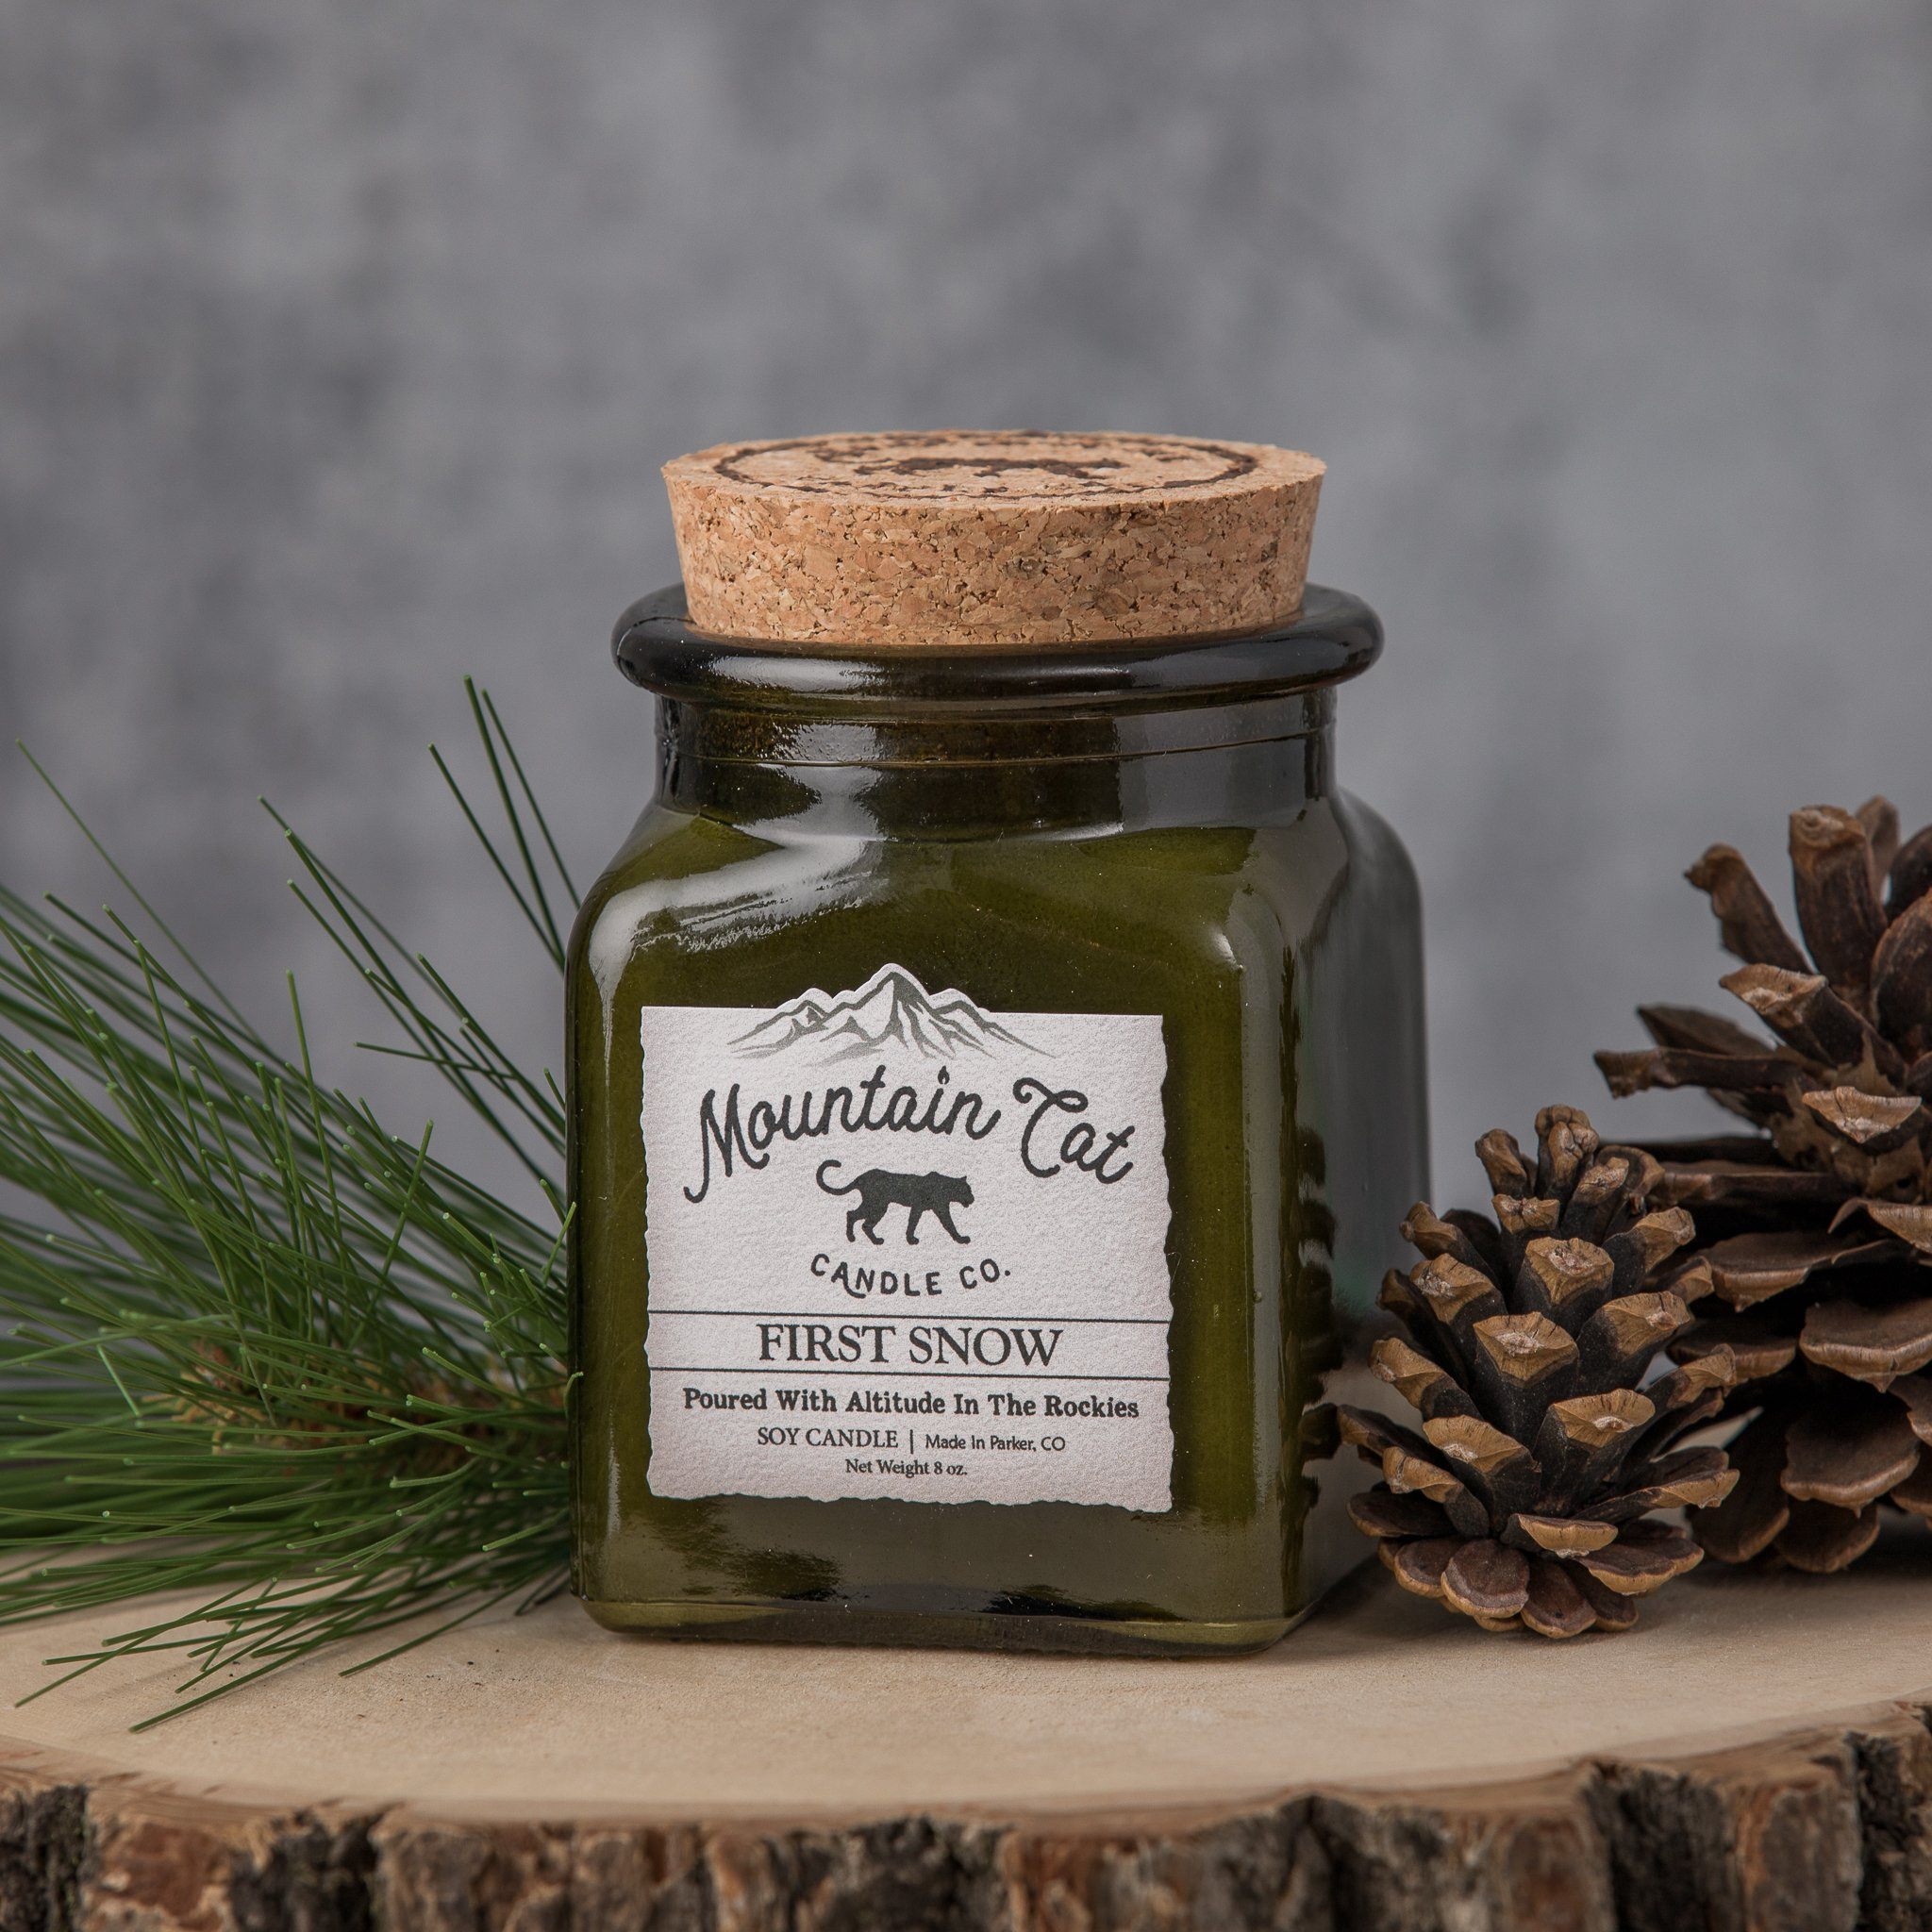 First Snow - Rustic Cabin Collection Candles Mountain Cat Candle Co Vintage Green Jar with Cork Lid 